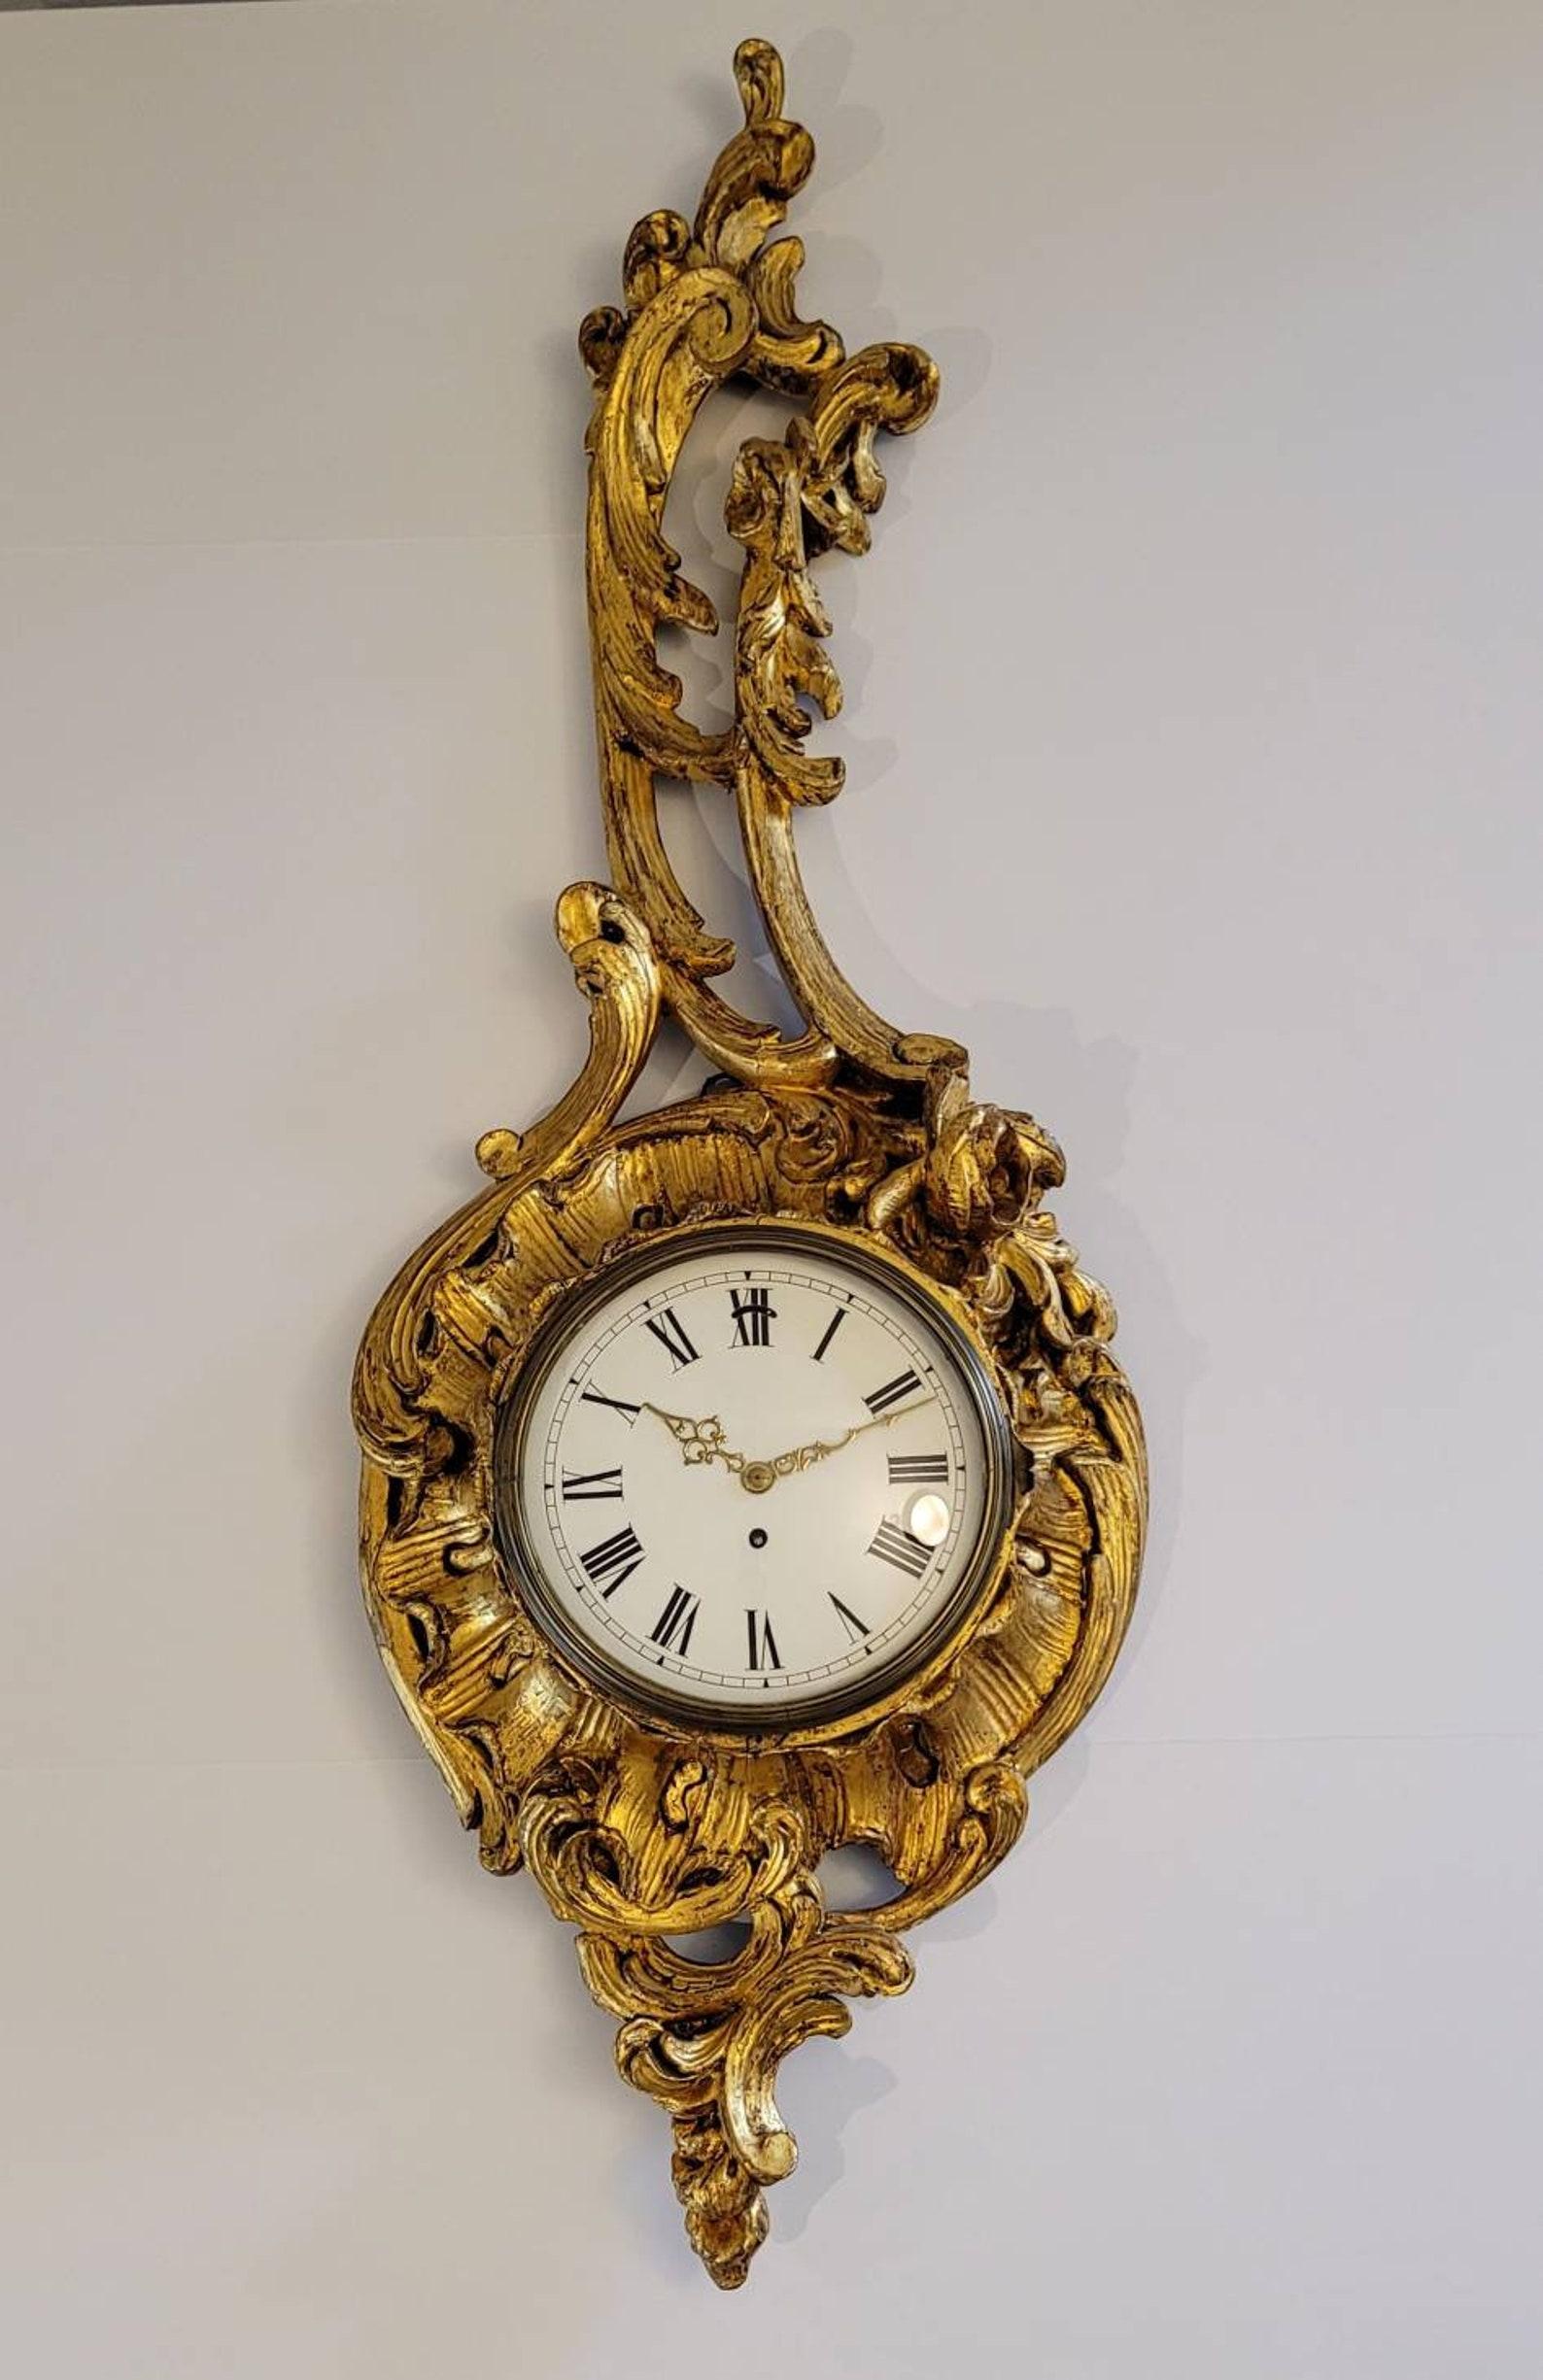 A stunning and most impressive large size antique French cartel clock. 

Exquisitely hand-crafted in France in the 19th century, very fine quality hand carved and rich brilliantly gilded wood case, exceptionally executed classical Louis XV style,